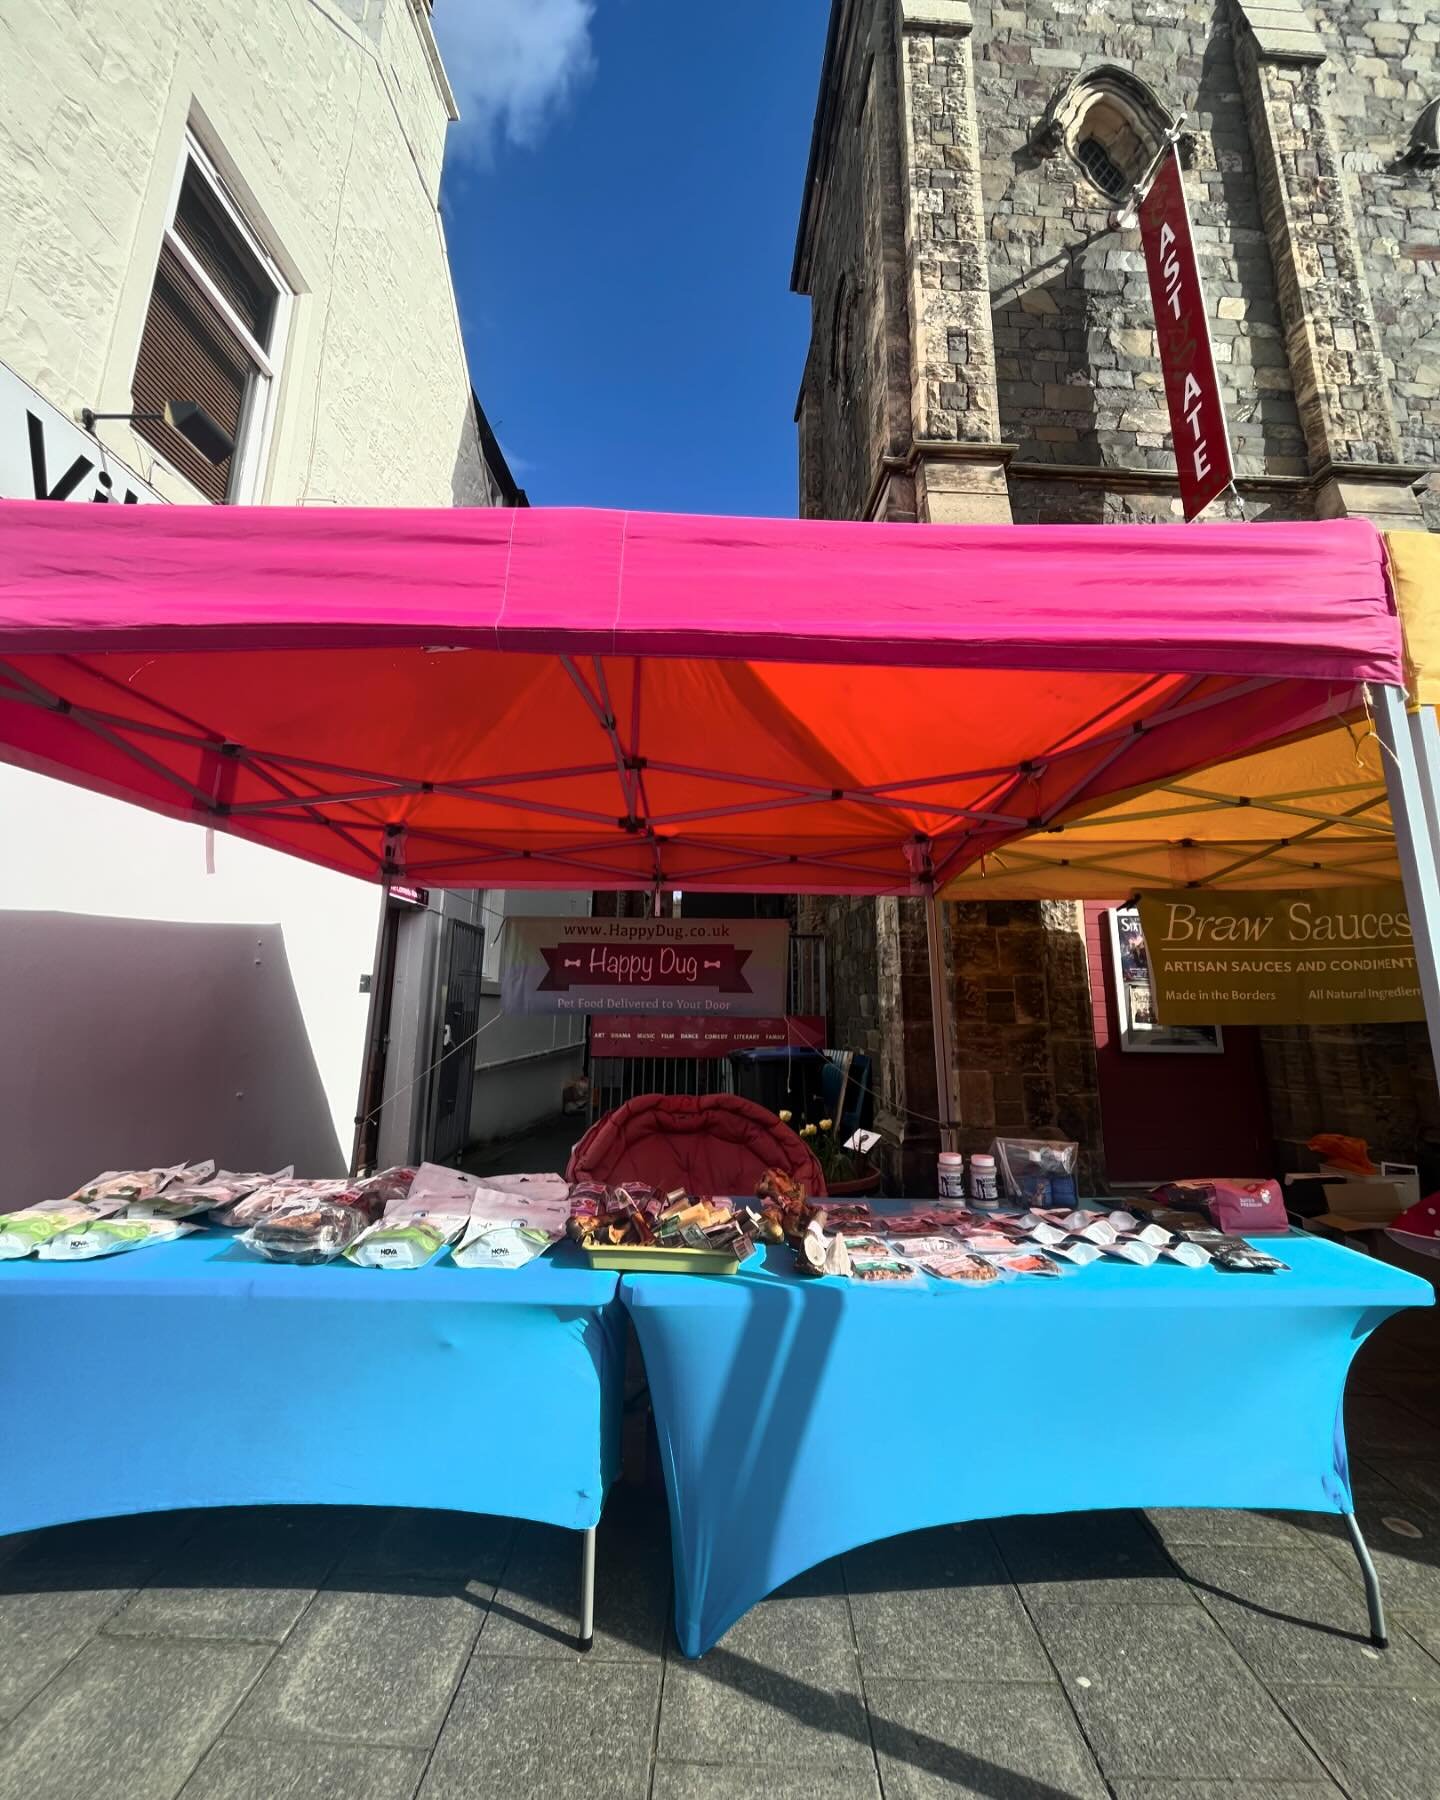 We are at the @peebles_market today until 15:00!! The sun is shining, great day for a lovely walk to see us 😎🐾🐾#market #peebles #saturday #sunshine #dog #dogs #saturdaymarket #visitpeebles